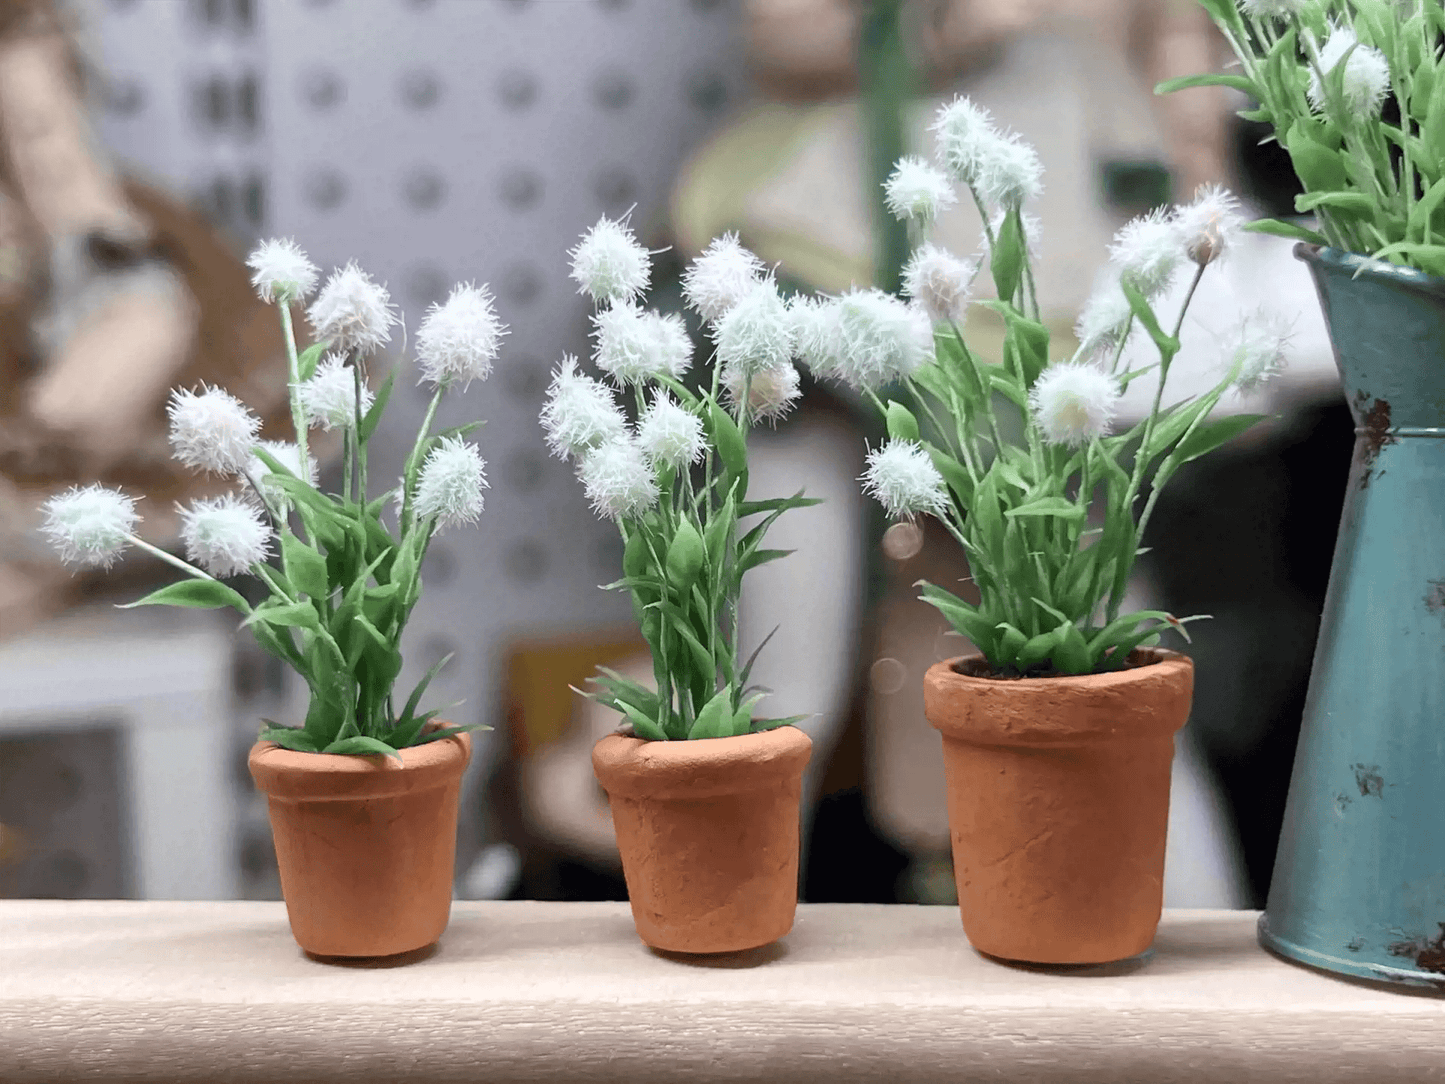 Lagurus Ovatus, also known as Hare's Tail Grass produces narrow hairy green leaves with white fluffy seed heads much like a Hare's Tail (hence the name).  Dollhouse Garden Plants Handmade from Clay.